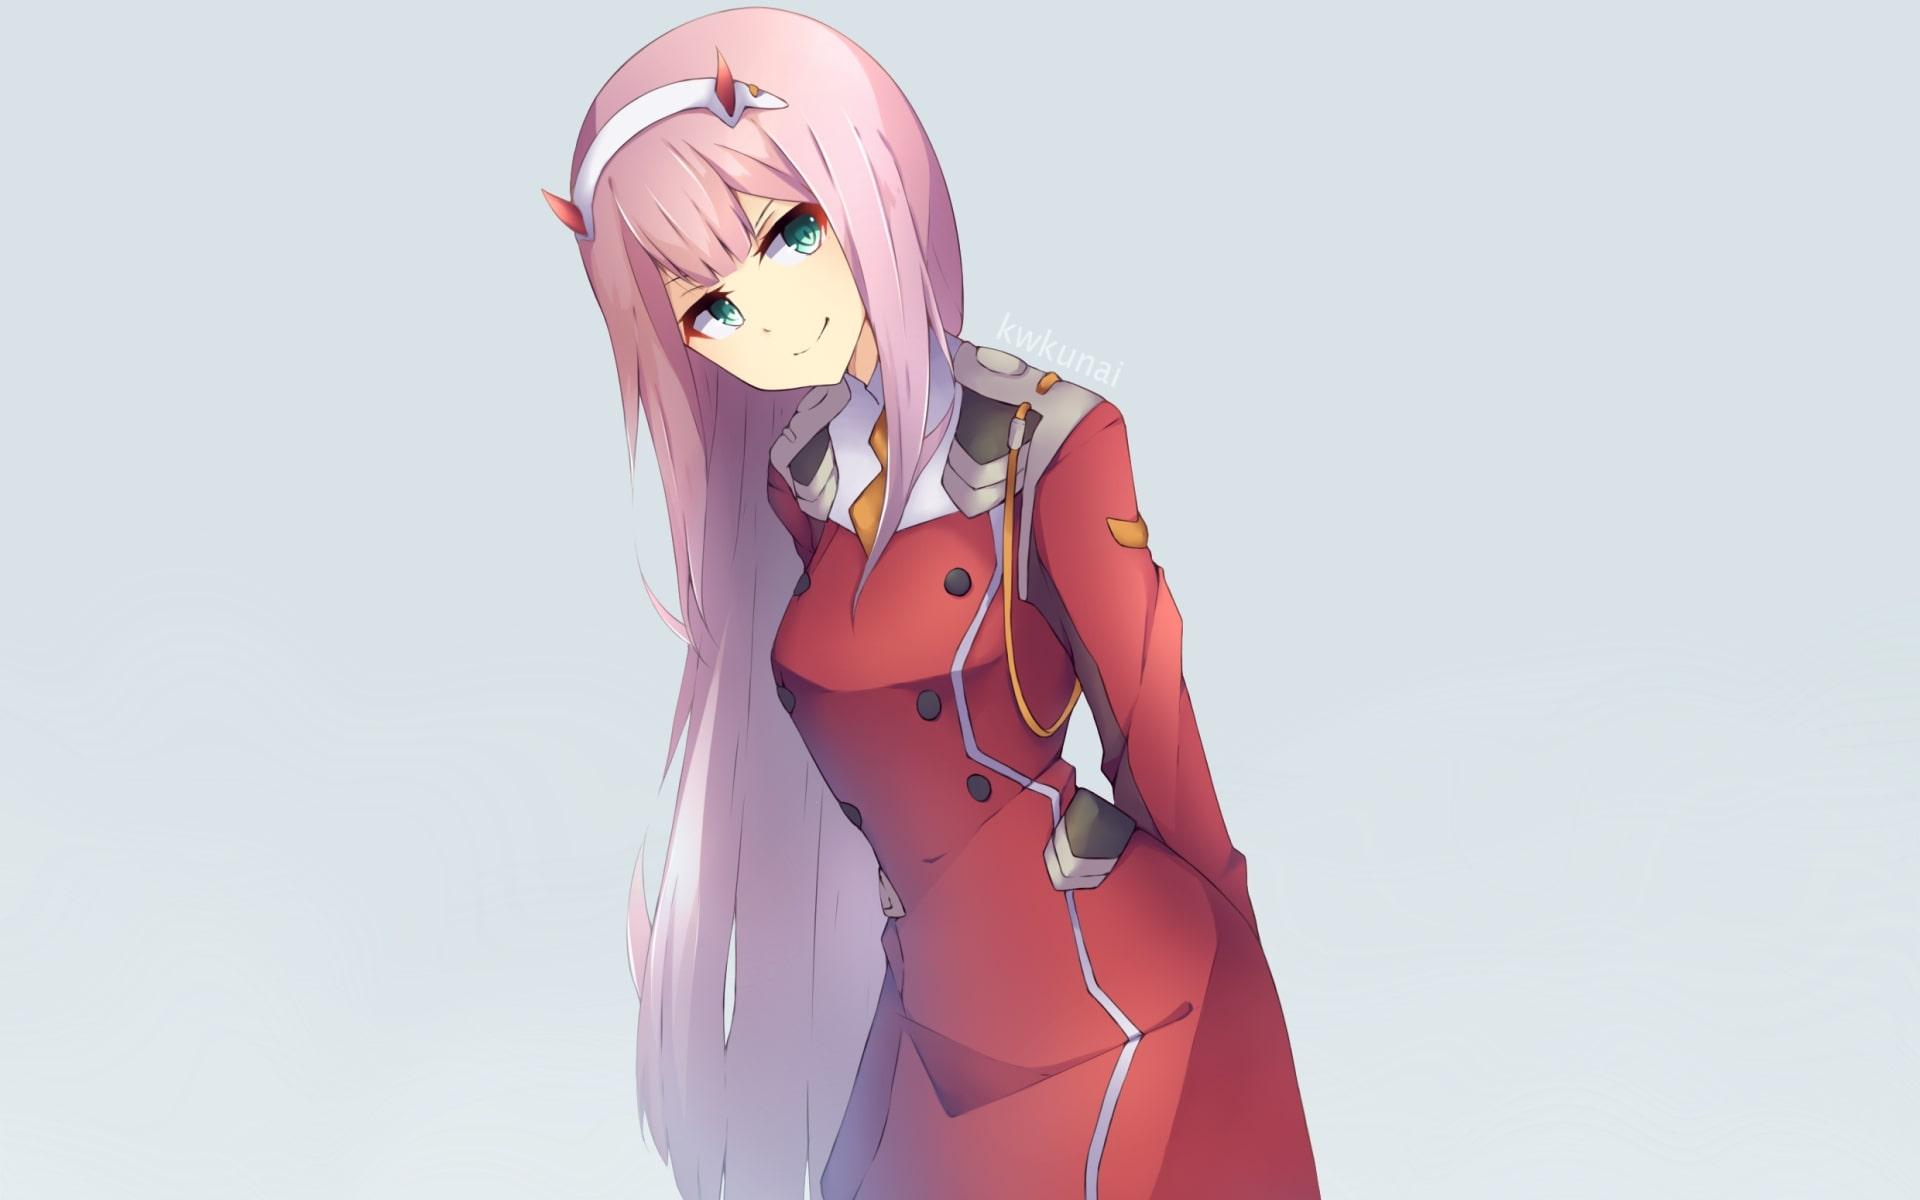 Wallpaper of Anime, Darling in the FranXX, Zero Two, 02 background & HD image